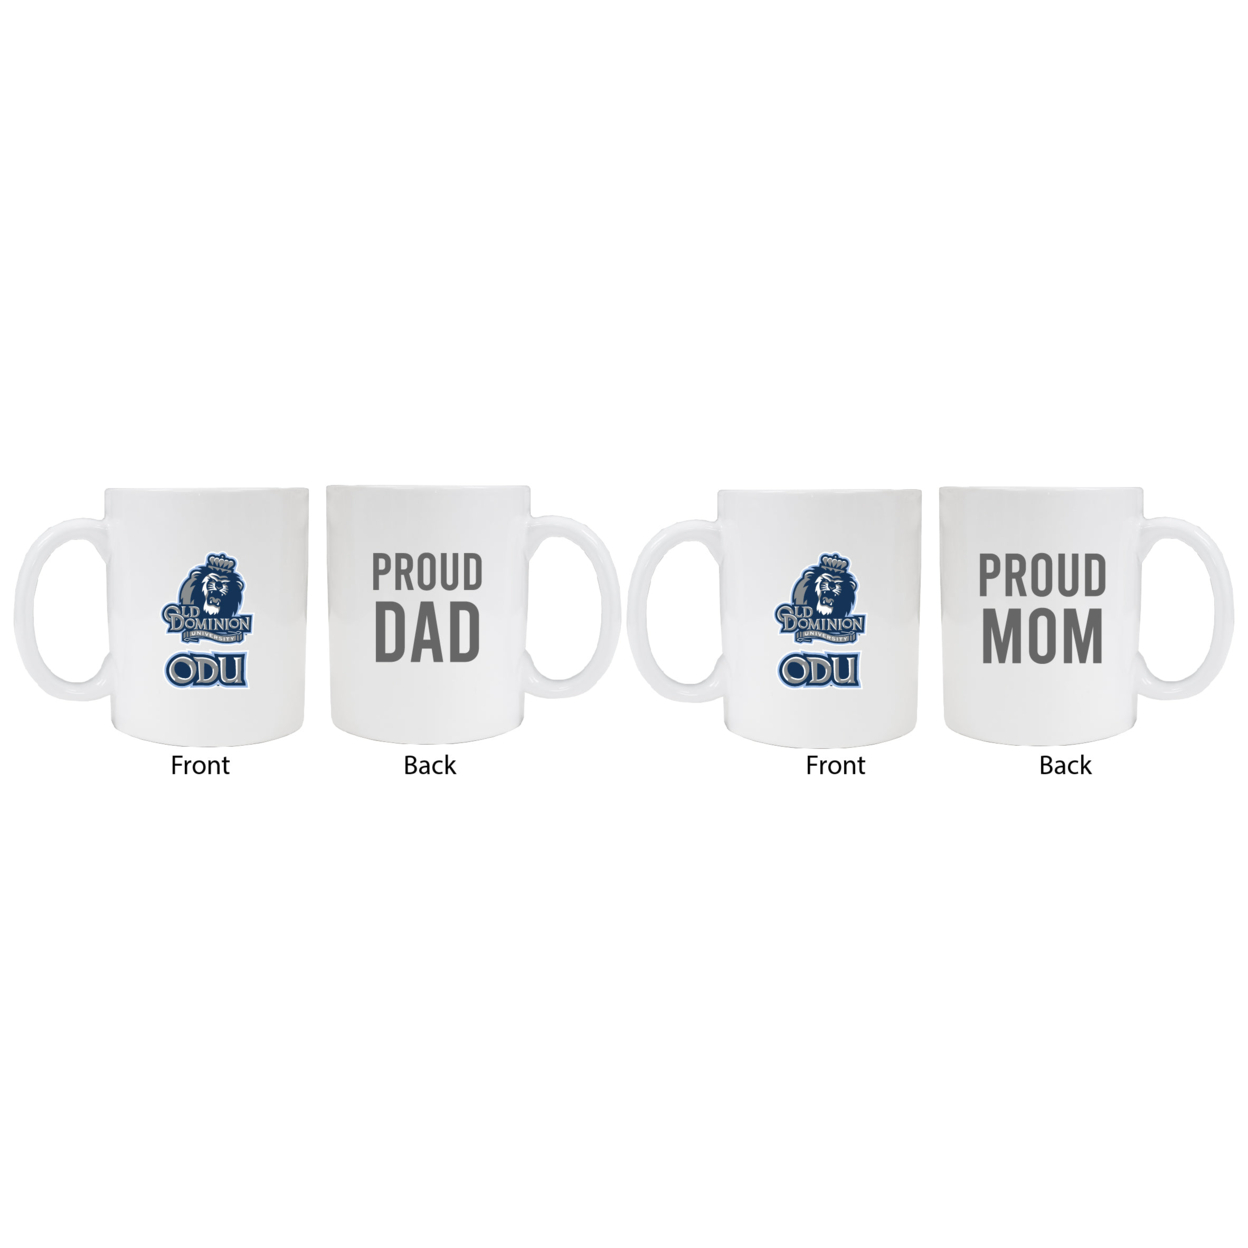 Old Dominion Monarchs Proud Mom And Dad White Ceramic Coffee Mug 2 Pack (White).